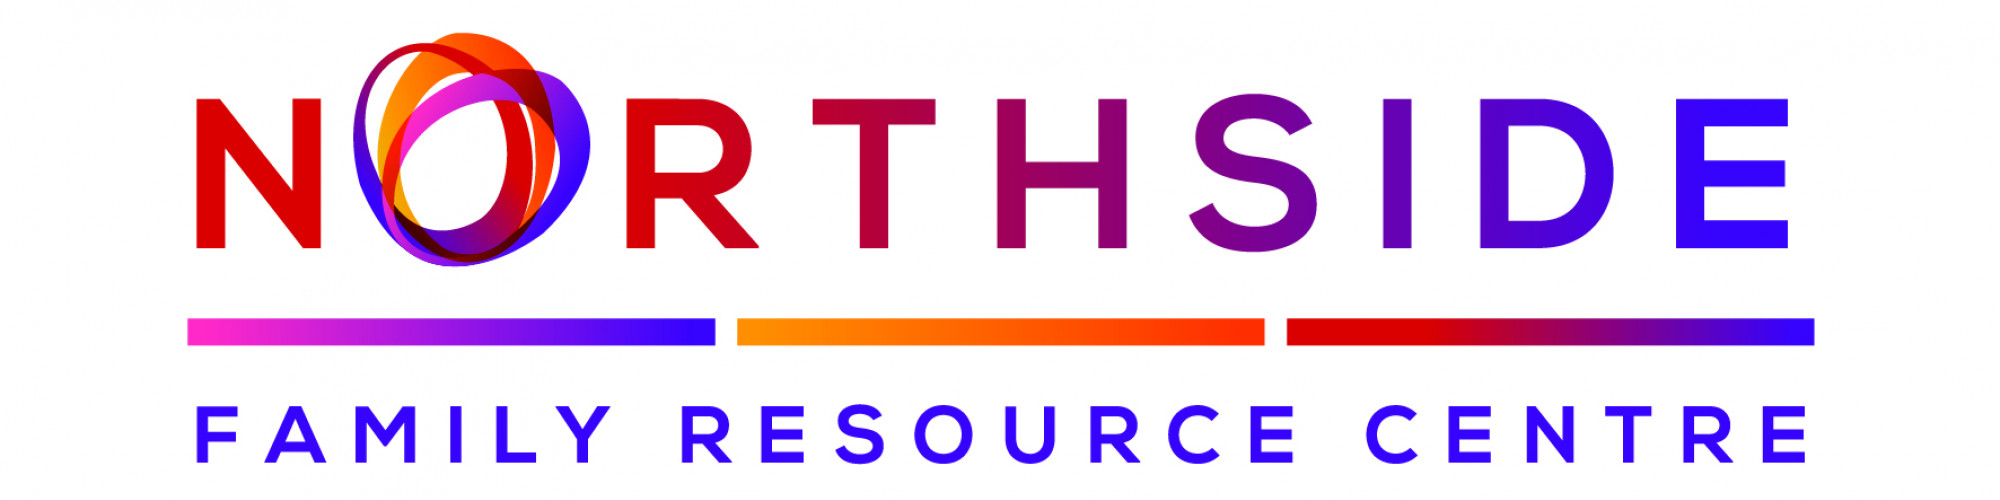 Northside Family Resource Centre